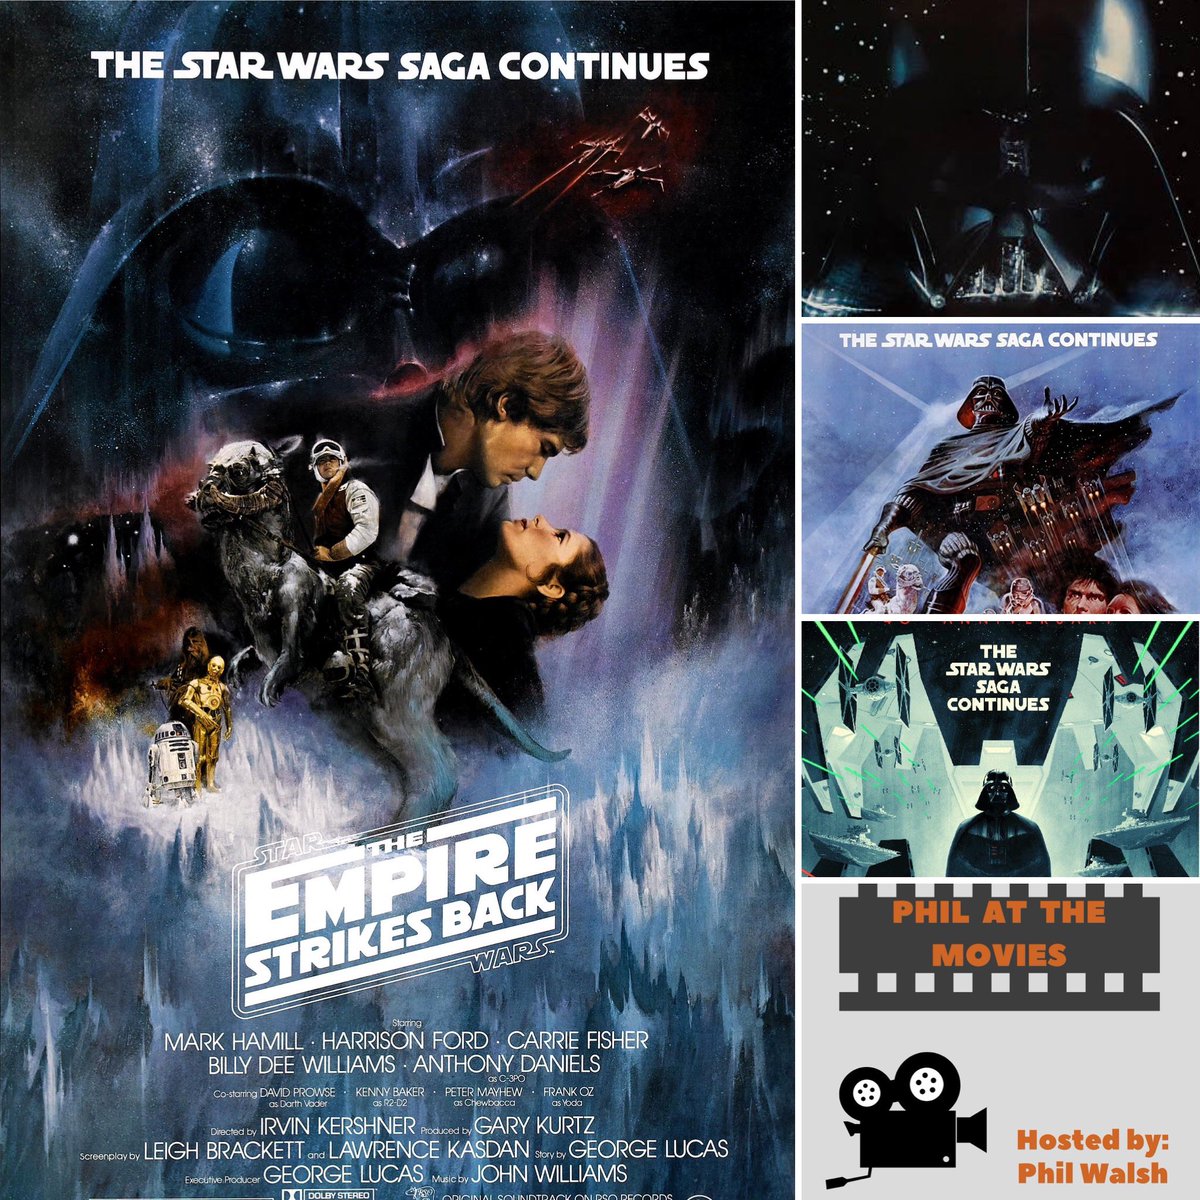 Arguably one of the greatest sequels of all time, with one of the greatest twists of all time.

The Force is strong with The Empire Strikes Back, and today’s episode! 

Available To Listen Now, in Your Galaxy.

rss.com/podcasts/philc…

#StarWars #TheEmpireStrikesBack #cinema